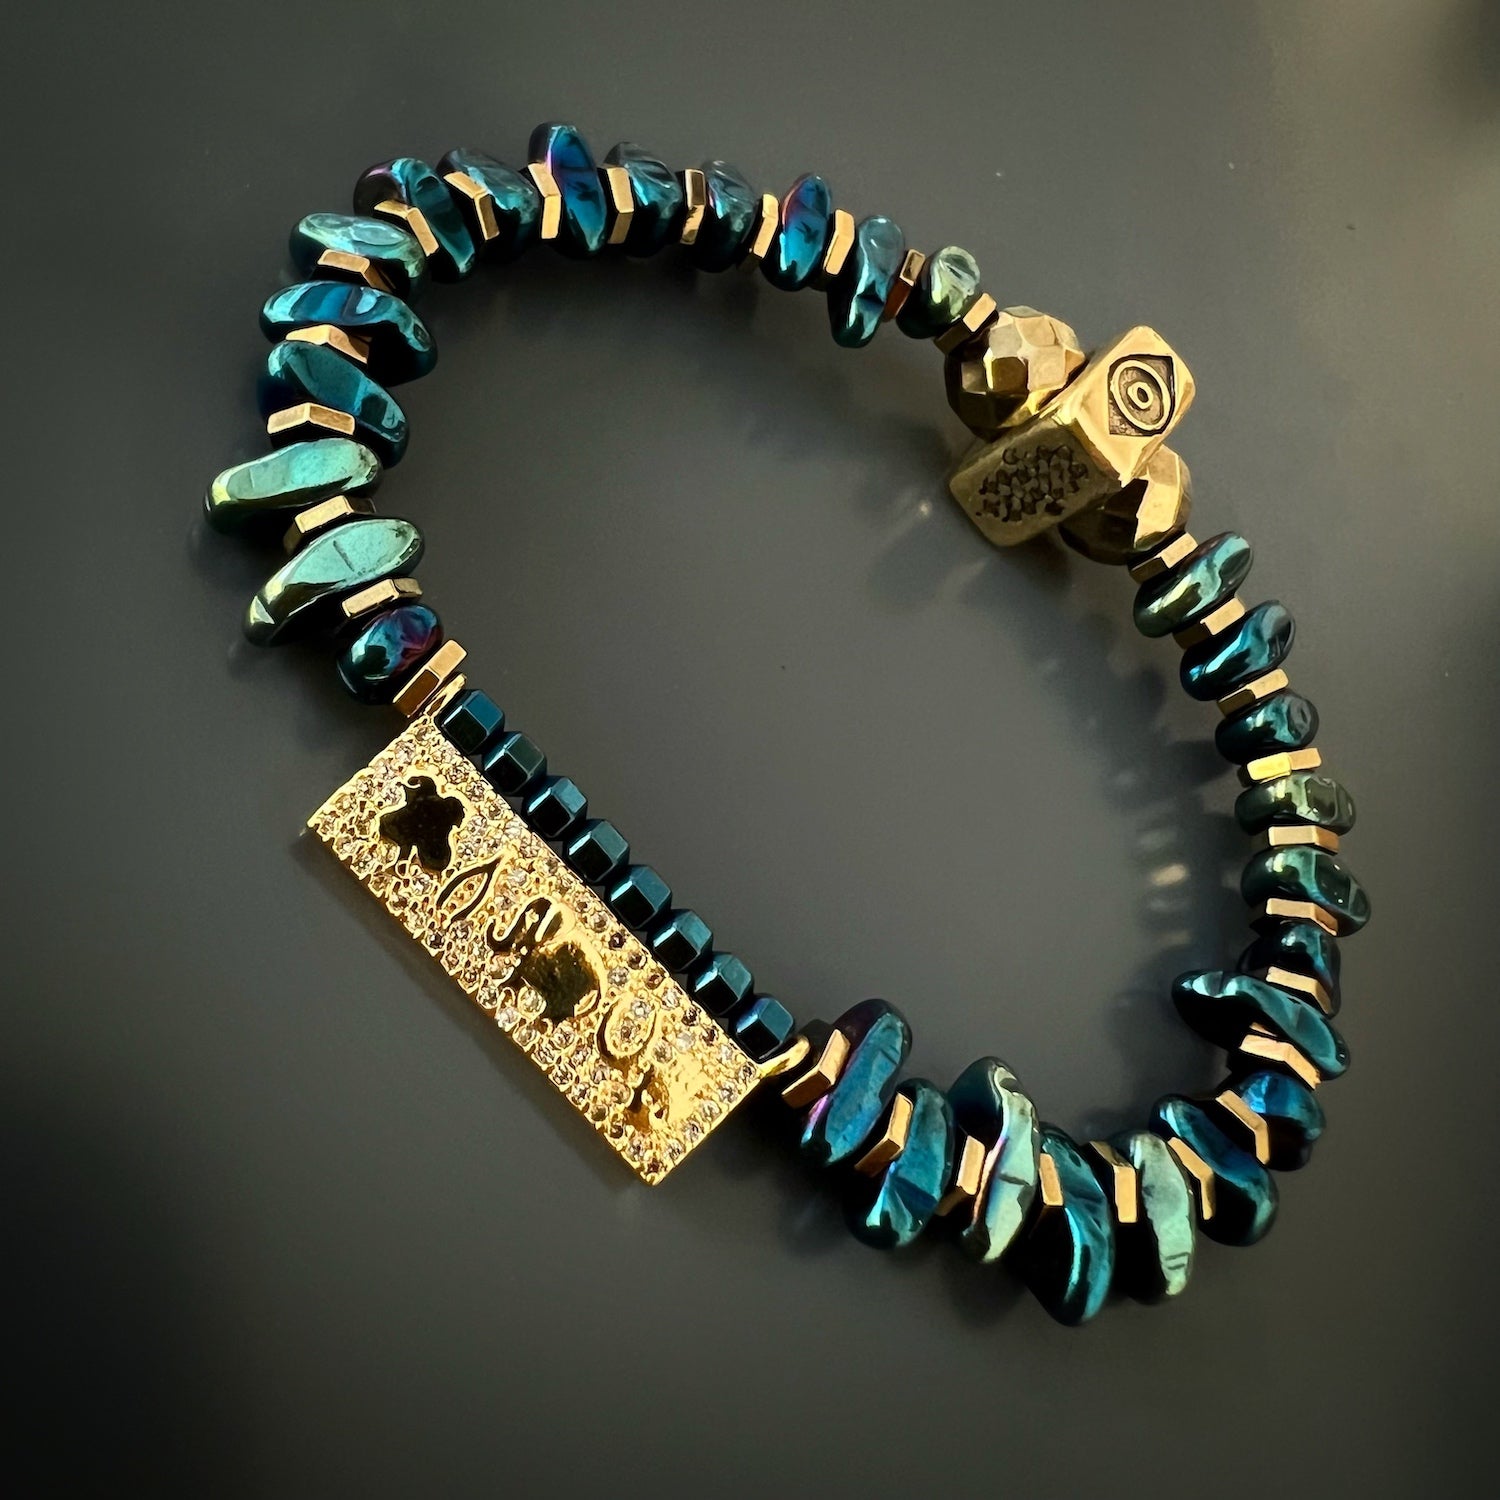 Explore the symbolic significance of the Protection &amp; Luck Blue Hematite Bracelet, adorned with talismanic symbols and blue hematite stones.